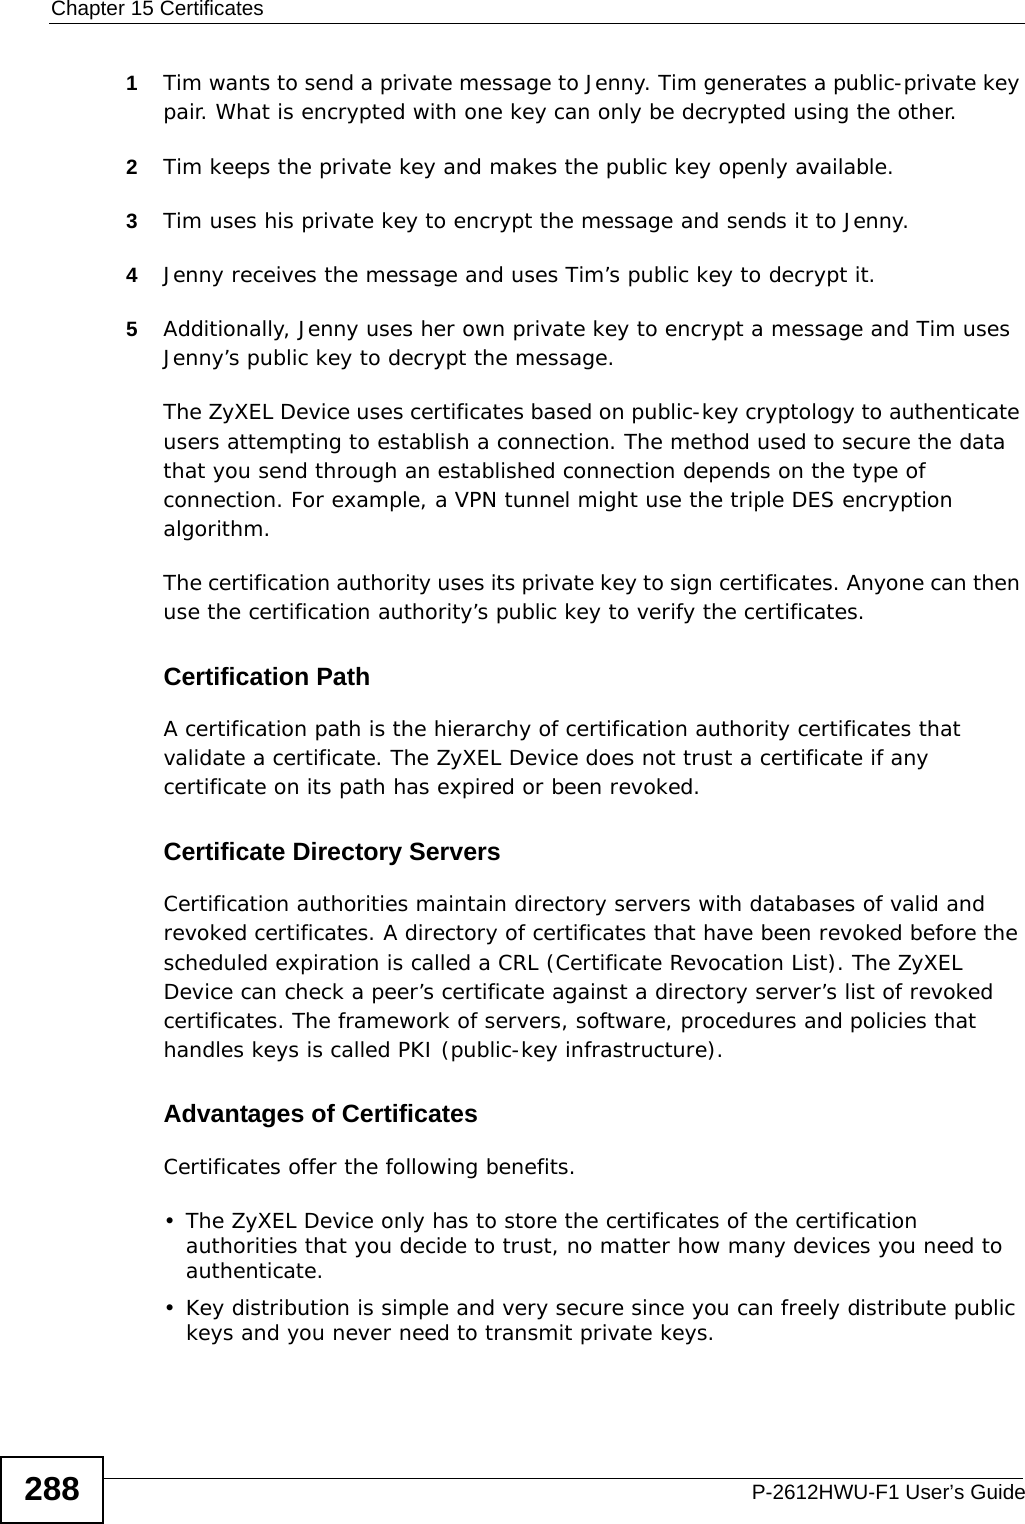 Chapter 15 CertificatesP-2612HWU-F1 User’s Guide2881Tim wants to send a private message to Jenny. Tim generates a public-private key pair. What is encrypted with one key can only be decrypted using the other.2Tim keeps the private key and makes the public key openly available.3Tim uses his private key to encrypt the message and sends it to Jenny.4Jenny receives the message and uses Tim’s public key to decrypt it.5Additionally, Jenny uses her own private key to encrypt a message and Tim uses Jenny’s public key to decrypt the message.The ZyXEL Device uses certificates based on public-key cryptology to authenticate users attempting to establish a connection. The method used to secure the data that you send through an established connection depends on the type of connection. For example, a VPN tunnel might use the triple DES encryption algorithm.The certification authority uses its private key to sign certificates. Anyone can then use the certification authority’s public key to verify the certificates.Certification PathA certification path is the hierarchy of certification authority certificates that validate a certificate. The ZyXEL Device does not trust a certificate if any certificate on its path has expired or been revoked. Certificate Directory ServersCertification authorities maintain directory servers with databases of valid and revoked certificates. A directory of certificates that have been revoked before the scheduled expiration is called a CRL (Certificate Revocation List). The ZyXEL Device can check a peer’s certificate against a directory server’s list of revoked certificates. The framework of servers, software, procedures and policies that handles keys is called PKI (public-key infrastructure).Advantages of CertificatesCertificates offer the following benefits.• The ZyXEL Device only has to store the certificates of the certification authorities that you decide to trust, no matter how many devices you need to authenticate. • Key distribution is simple and very secure since you can freely distribute public keys and you never need to transmit private keys.